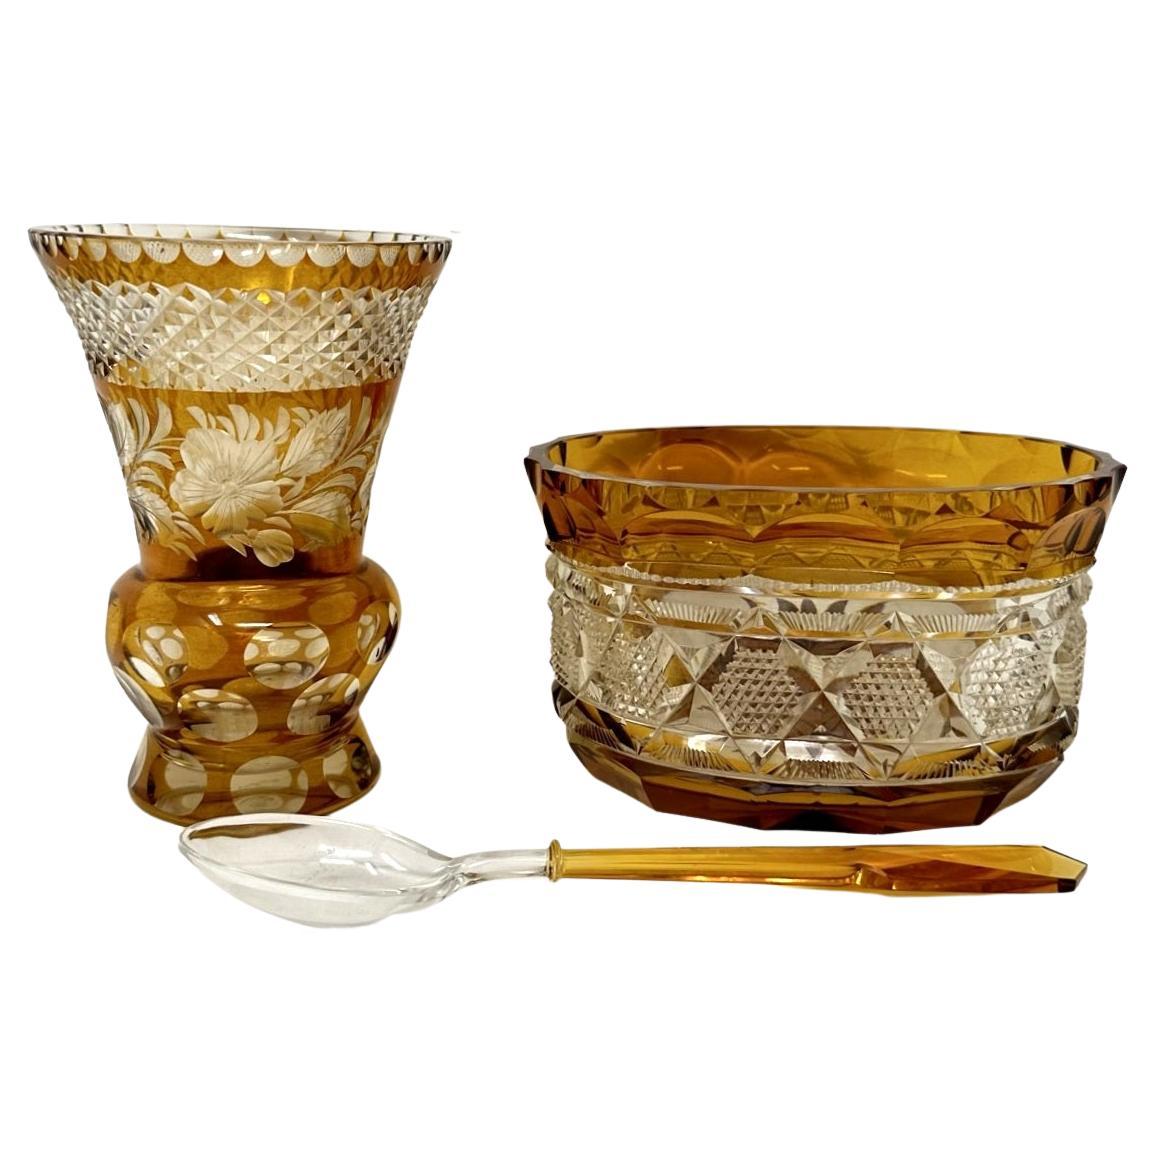 Stunning example of a collection of Moser style Bohemian Amber heavy gauge cut crystal glass Vase of bulbous form with a deep flaired rim and an exquisite oval bowl, late Nineteenth, early 20eth century. 

Each piece has been skillfully handcut